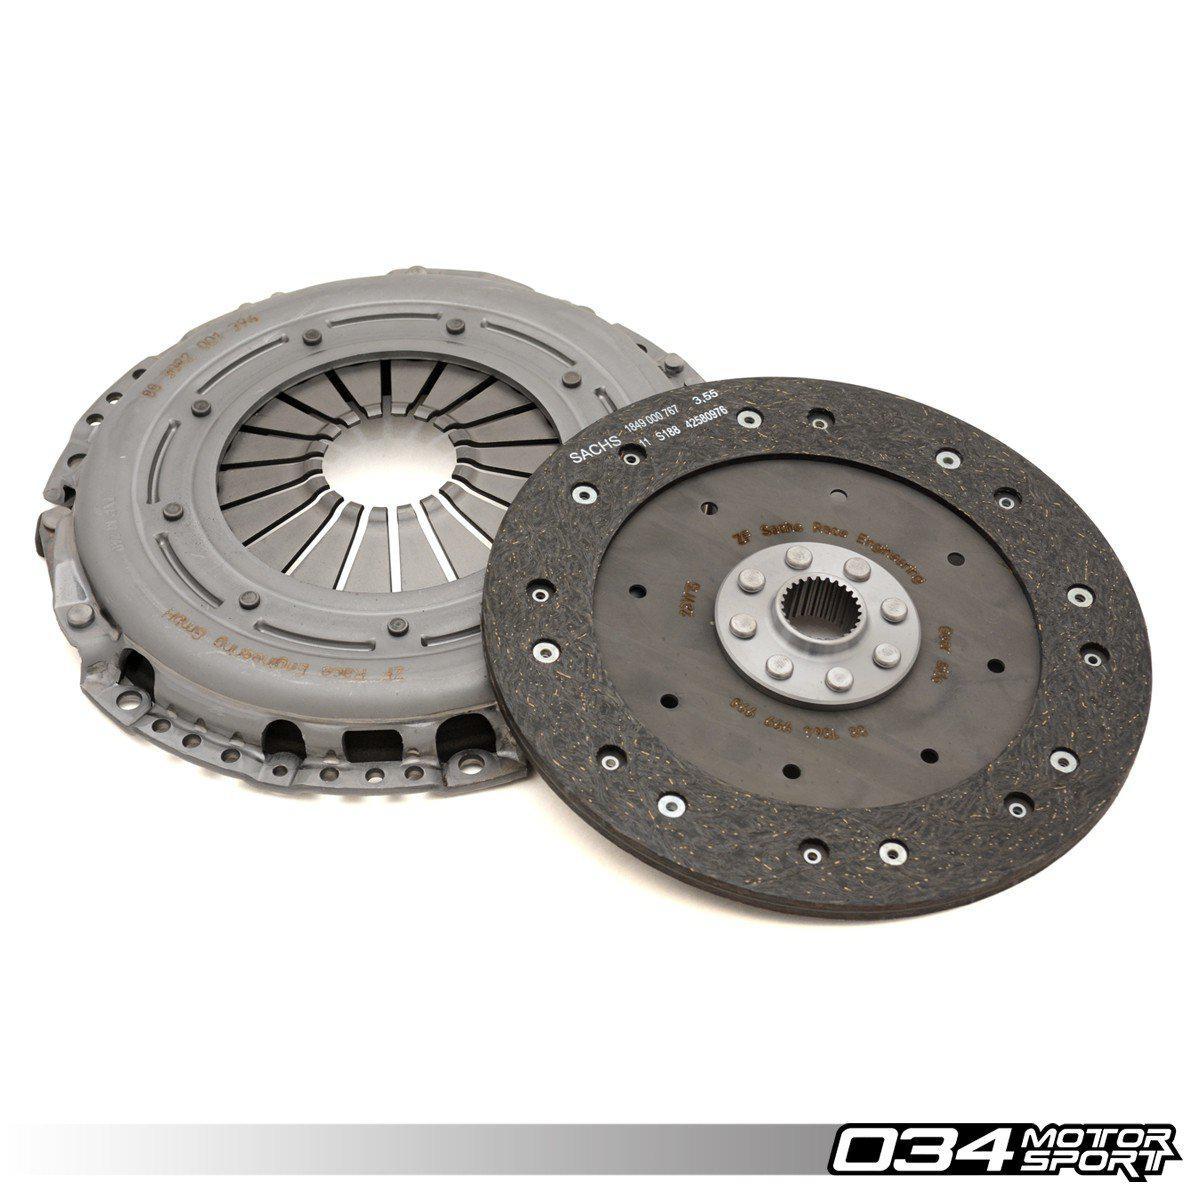 Sachs Performance Audi TTRS 2.5 TFSI Clutch Kit With Organic Disc & Upgraded Pressure Plate-A Little Tuning Co